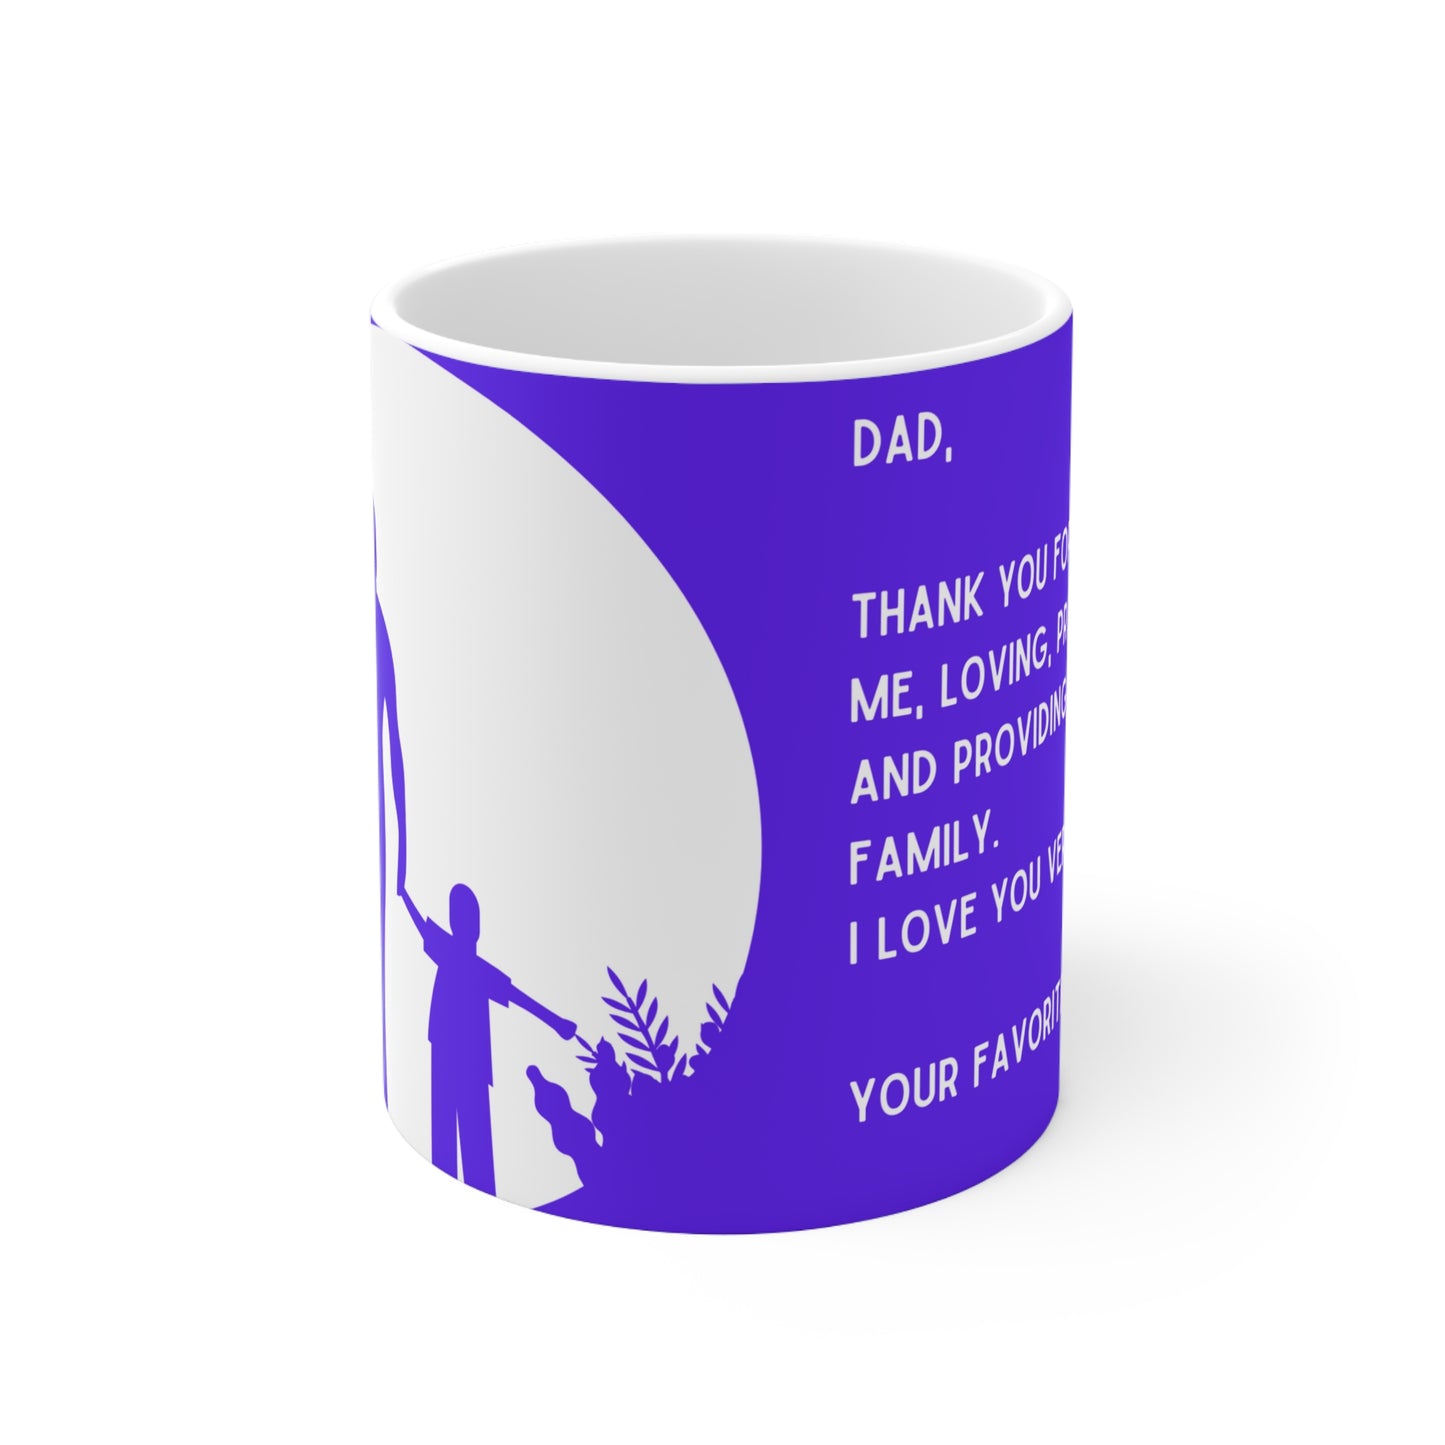 A heartfelt message of love and appreciation coffee mug for that special dad. This will soon be his favorite mug.